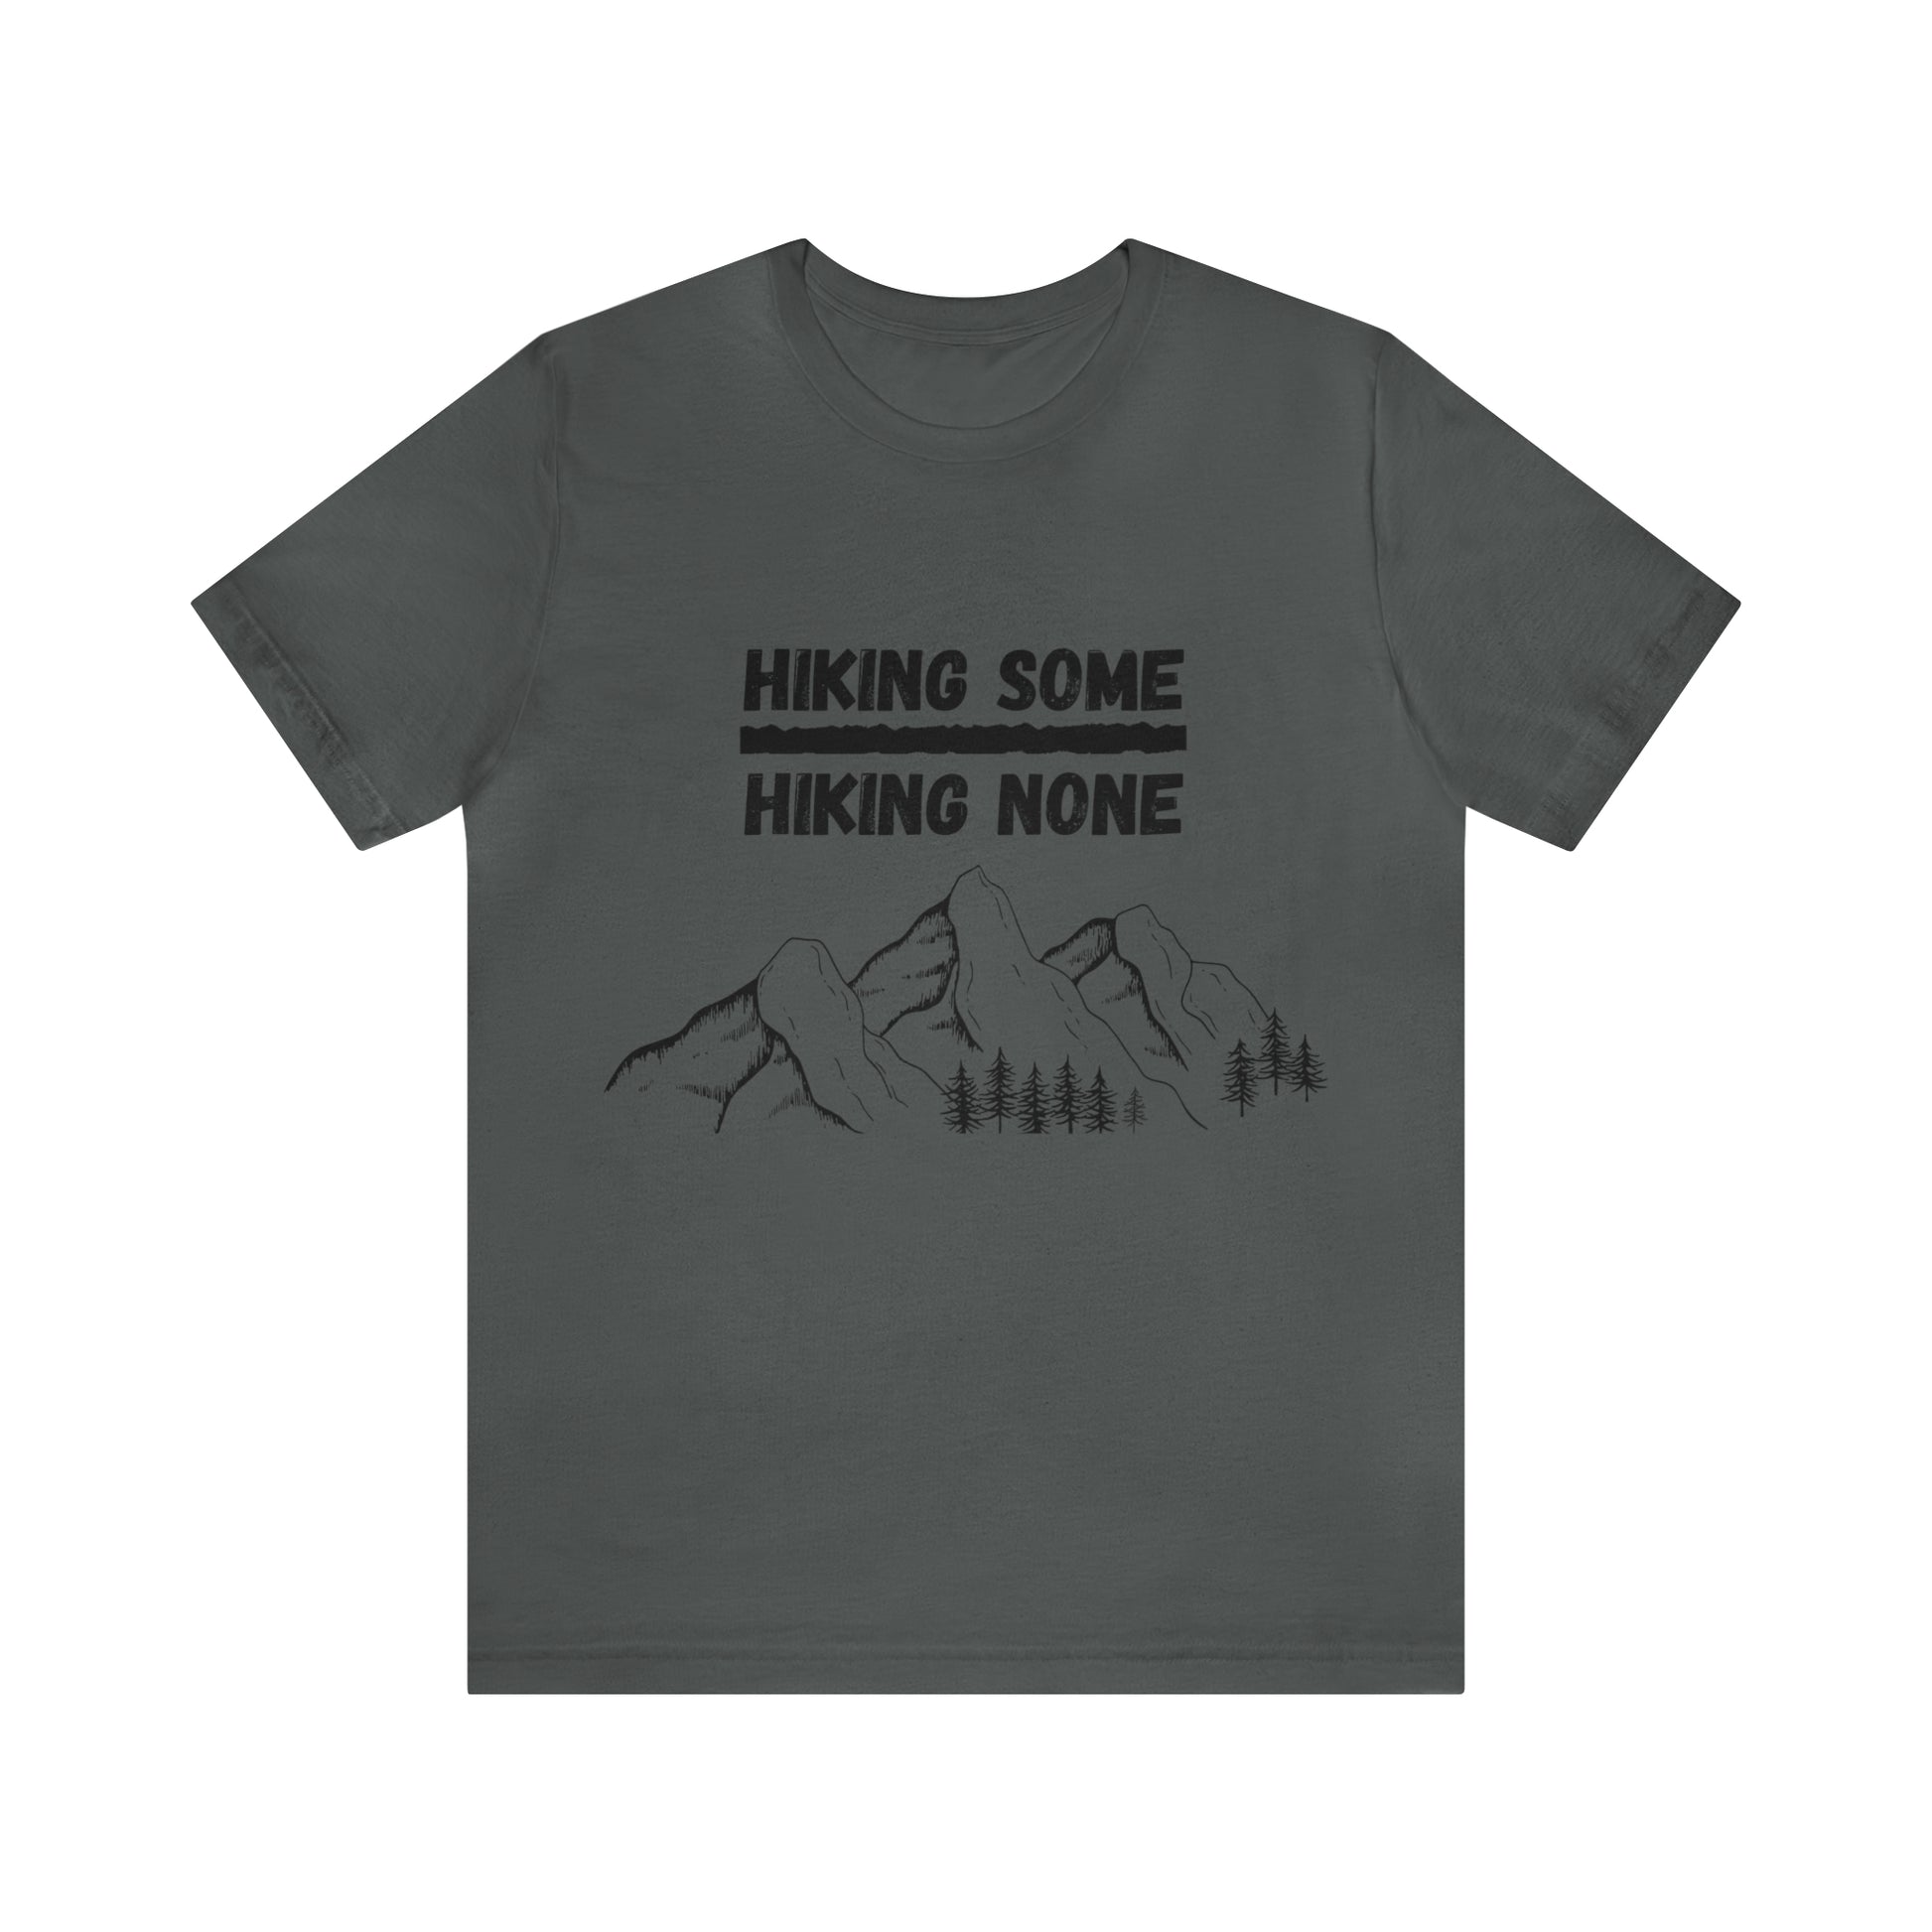 Hiking some over hiking none shirt, Hiking some is better than hiking none shirt, shirt for hikers, shirt for hike lovers, mountain t-shirt